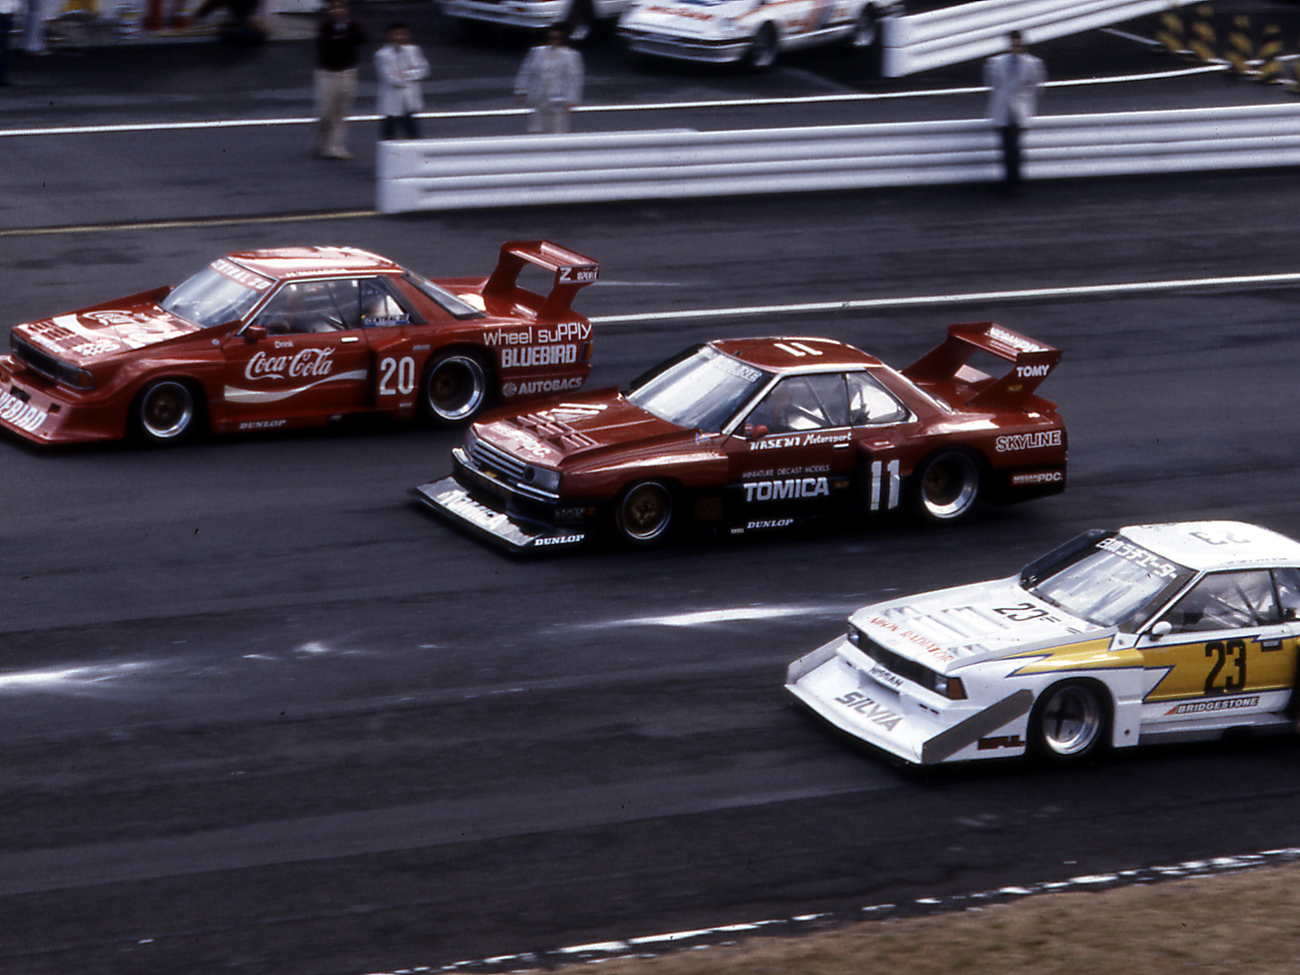 NISMO | Racing GT-R HISTORY ～写真で振り返る、熱きDNAの系譜～